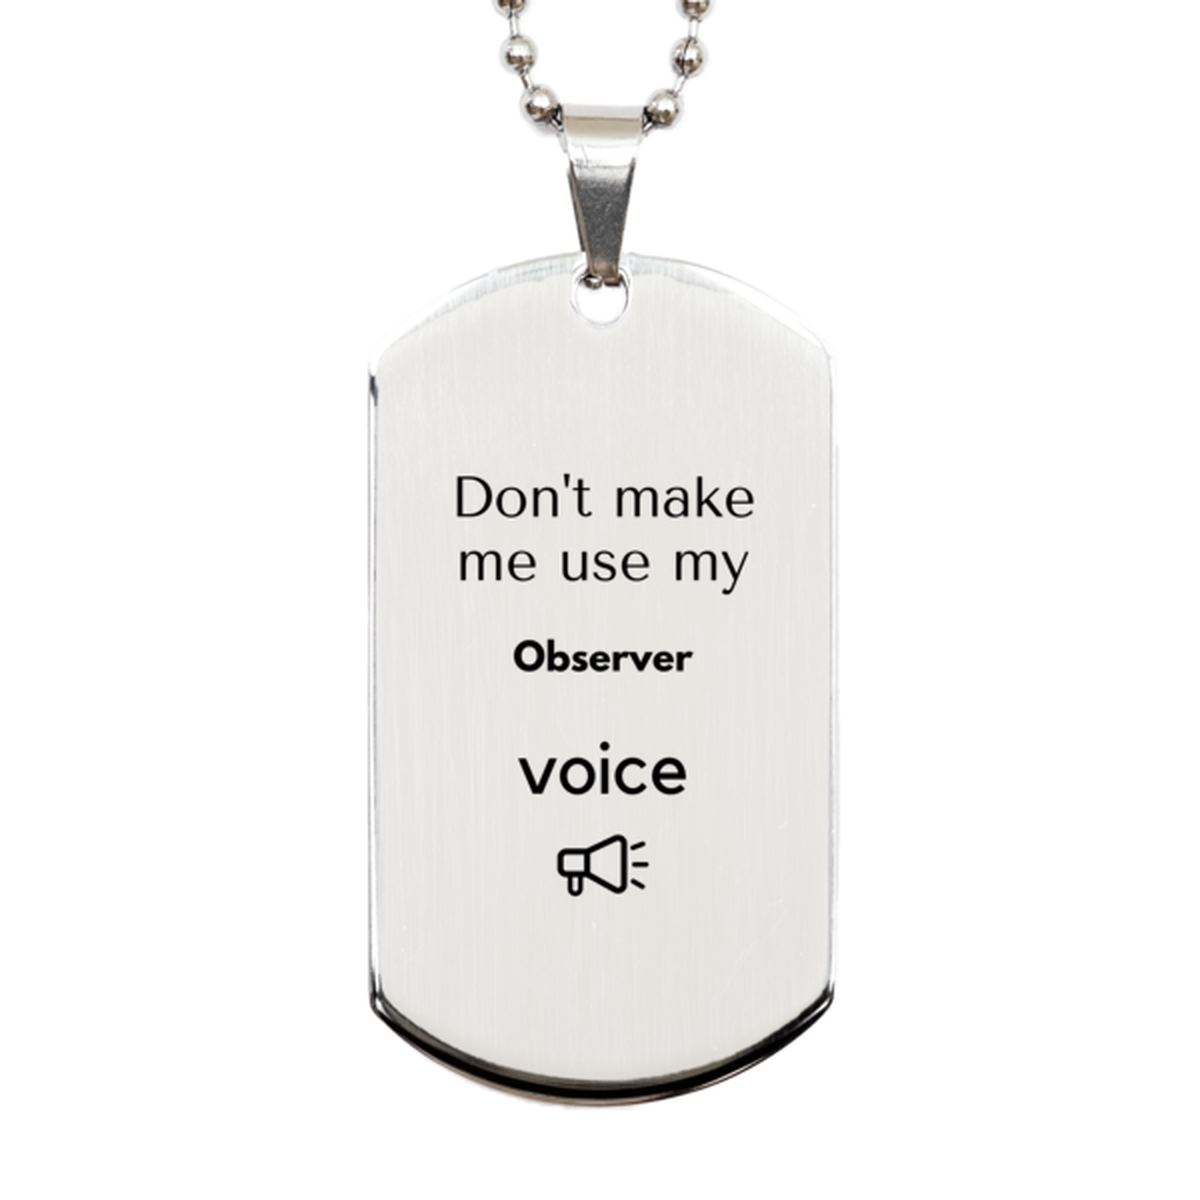 Don't make me use my Observer voice, Sarcasm Observer Gifts, Christmas Observer Silver Dog Tag Birthday Unique Gifts For Observer Coworkers, Men, Women, Colleague, Friends